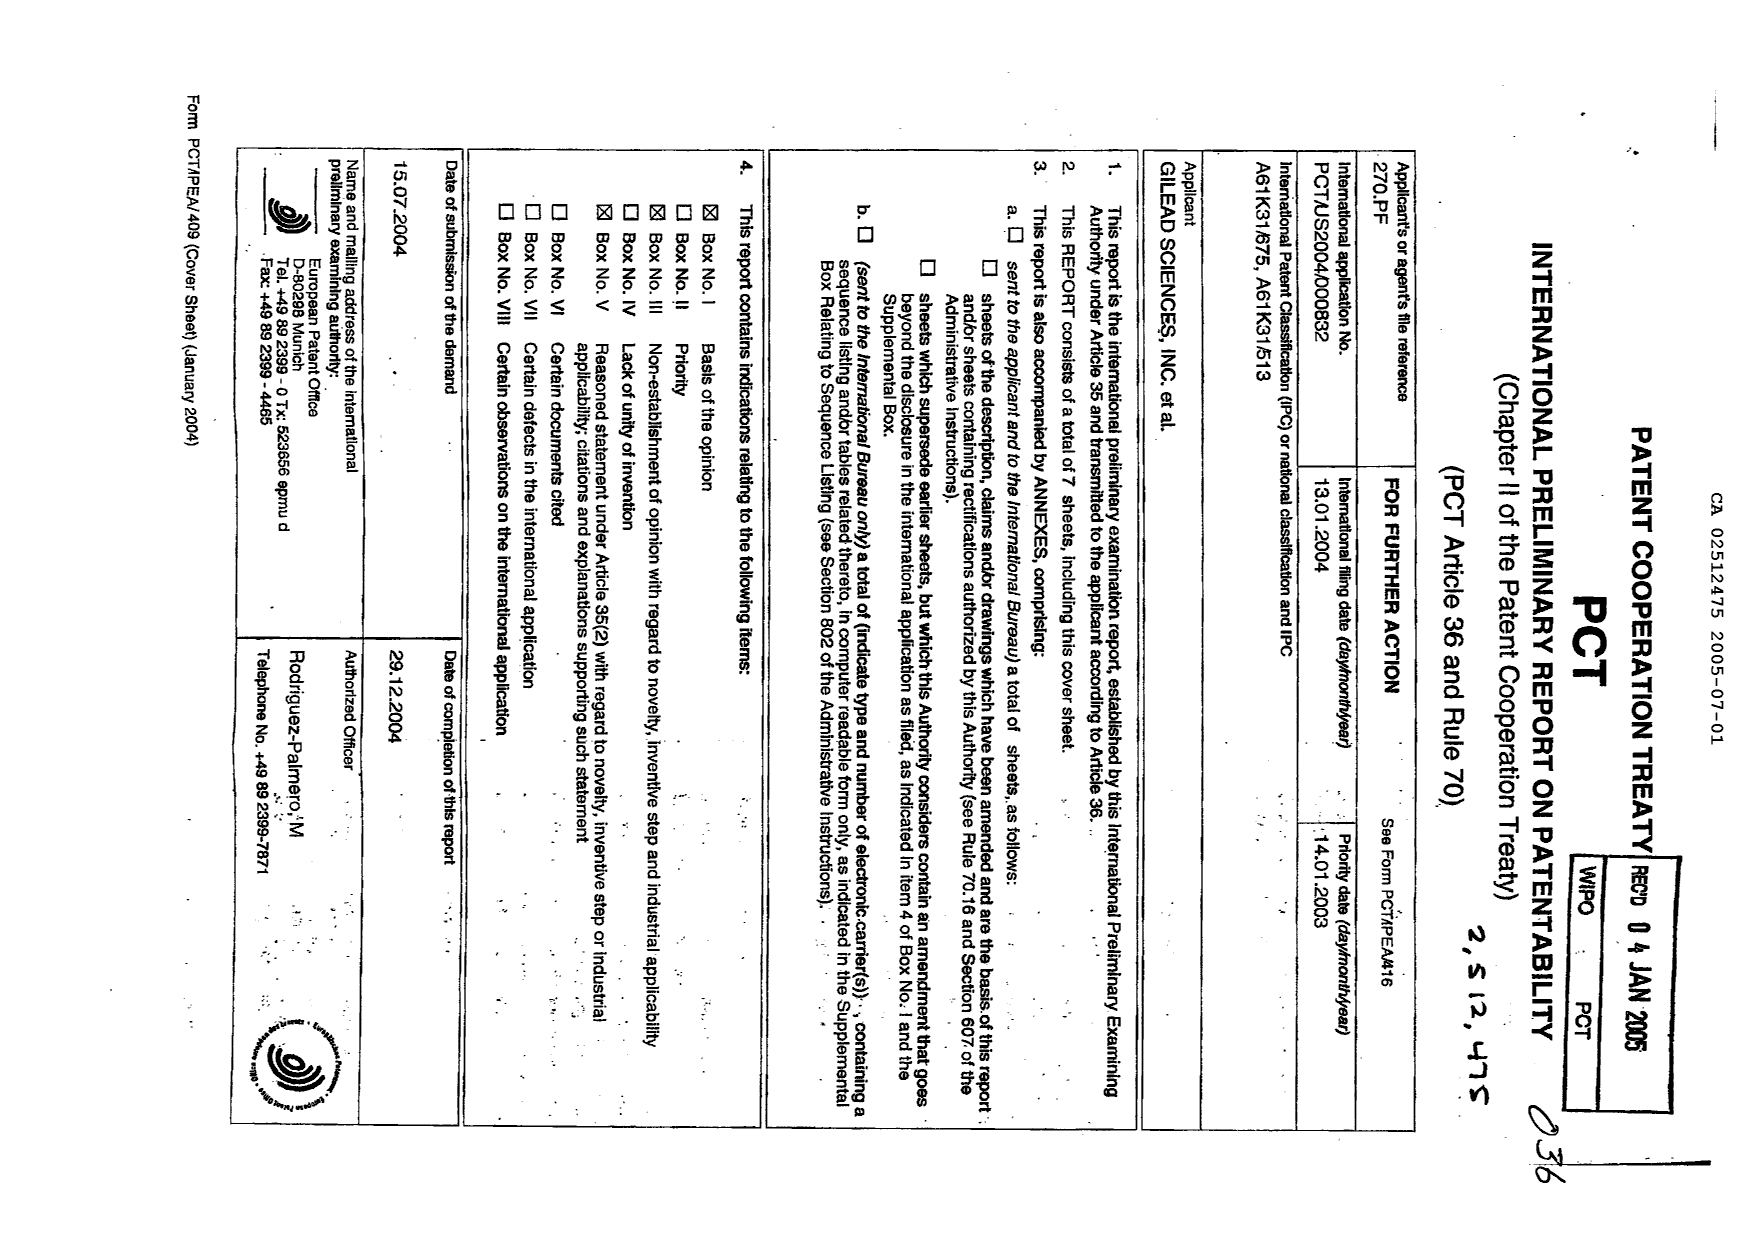 Canadian Patent Document 2512475. PCT 20041201. Image 1 of 7